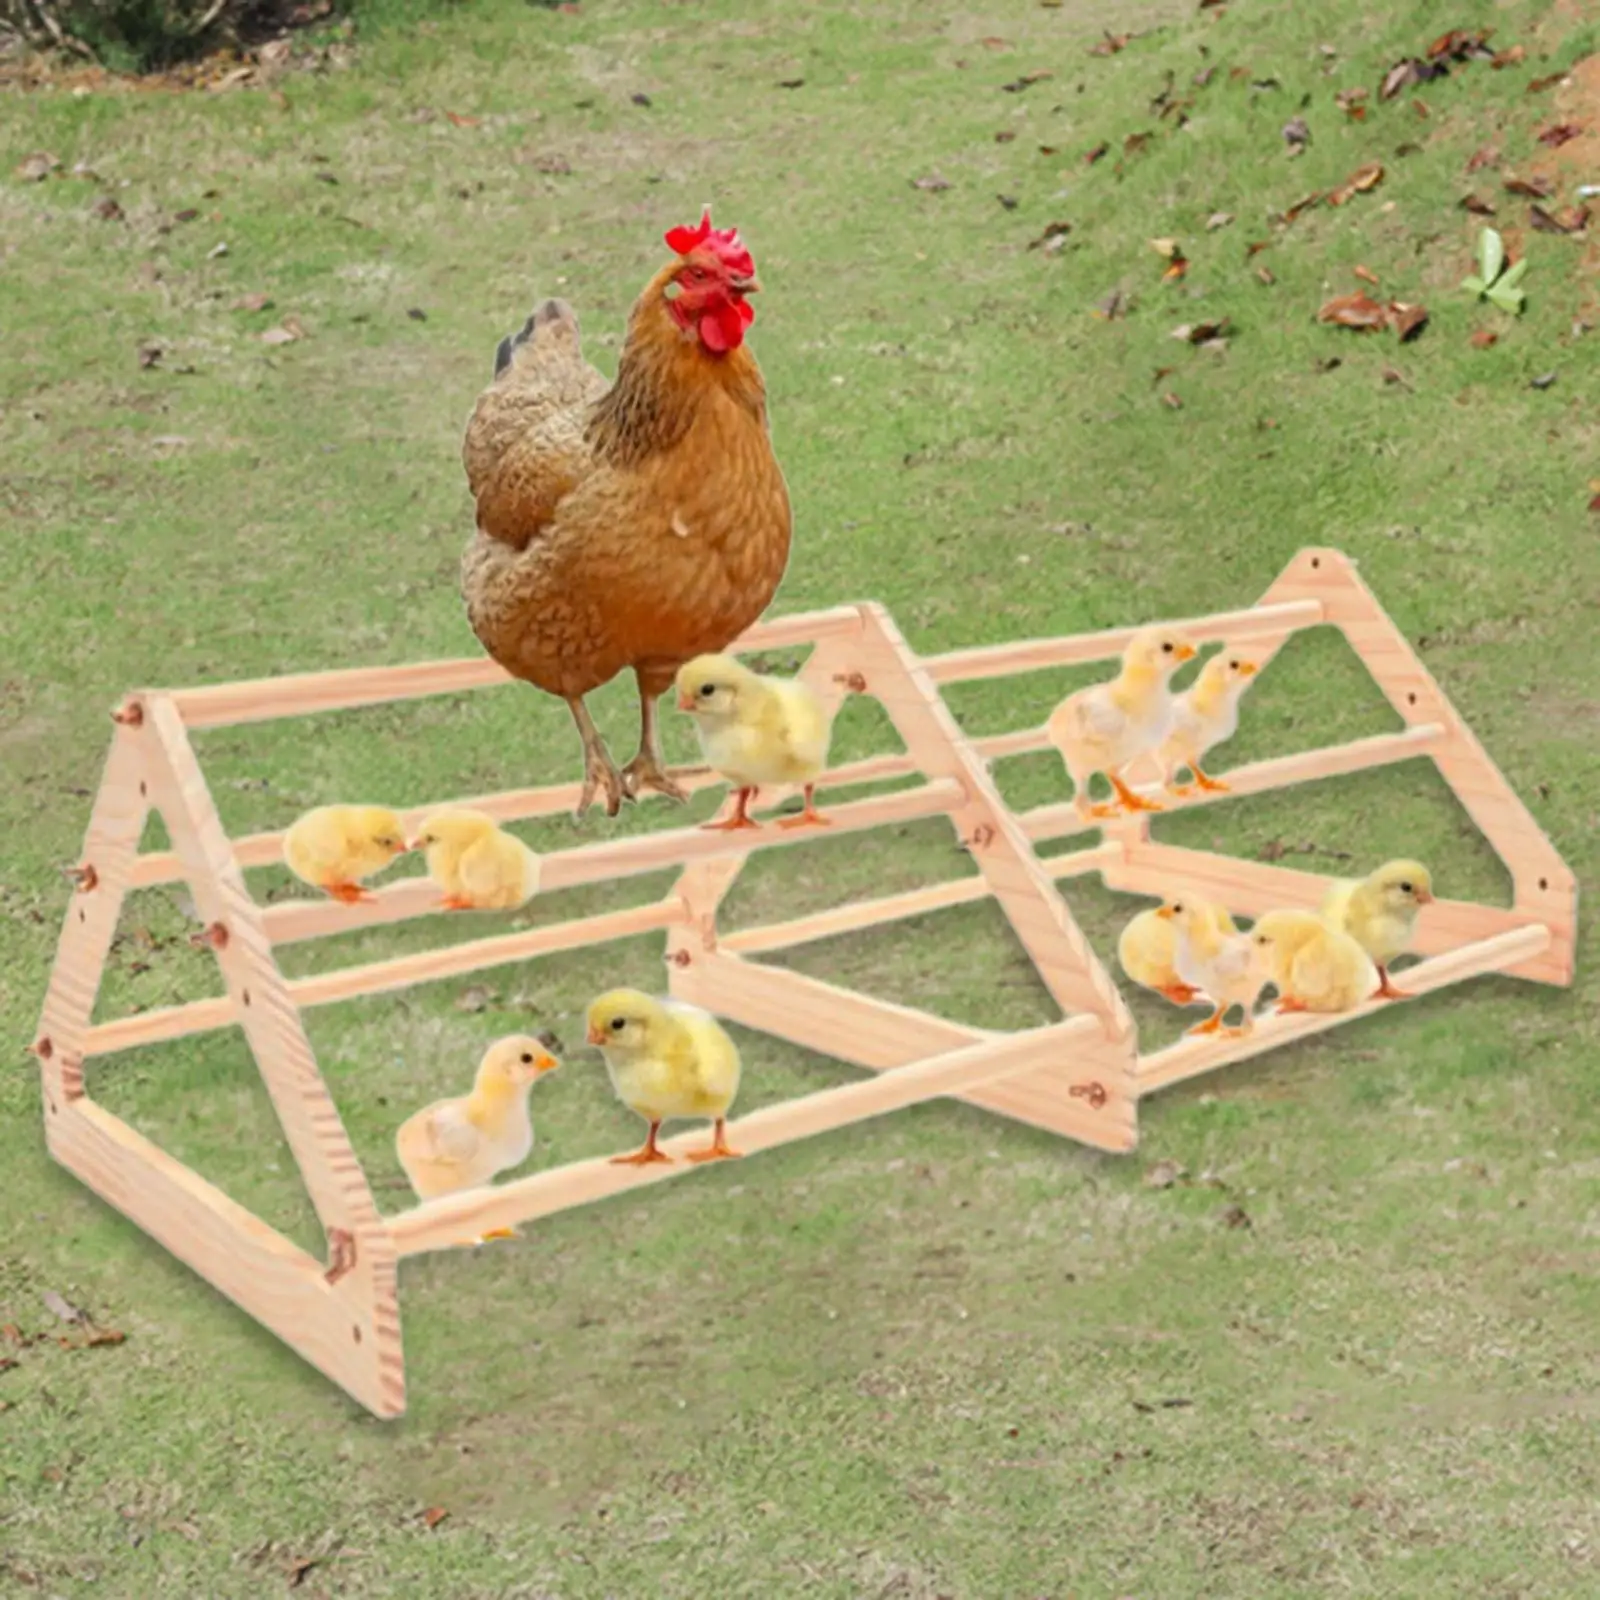 Wooden Perch Stand Chicken Roosts Toy for Hens Handmade 3 Layer Playstand Baby Chicks Bird Stand Holder Chick Perch Chick Stand